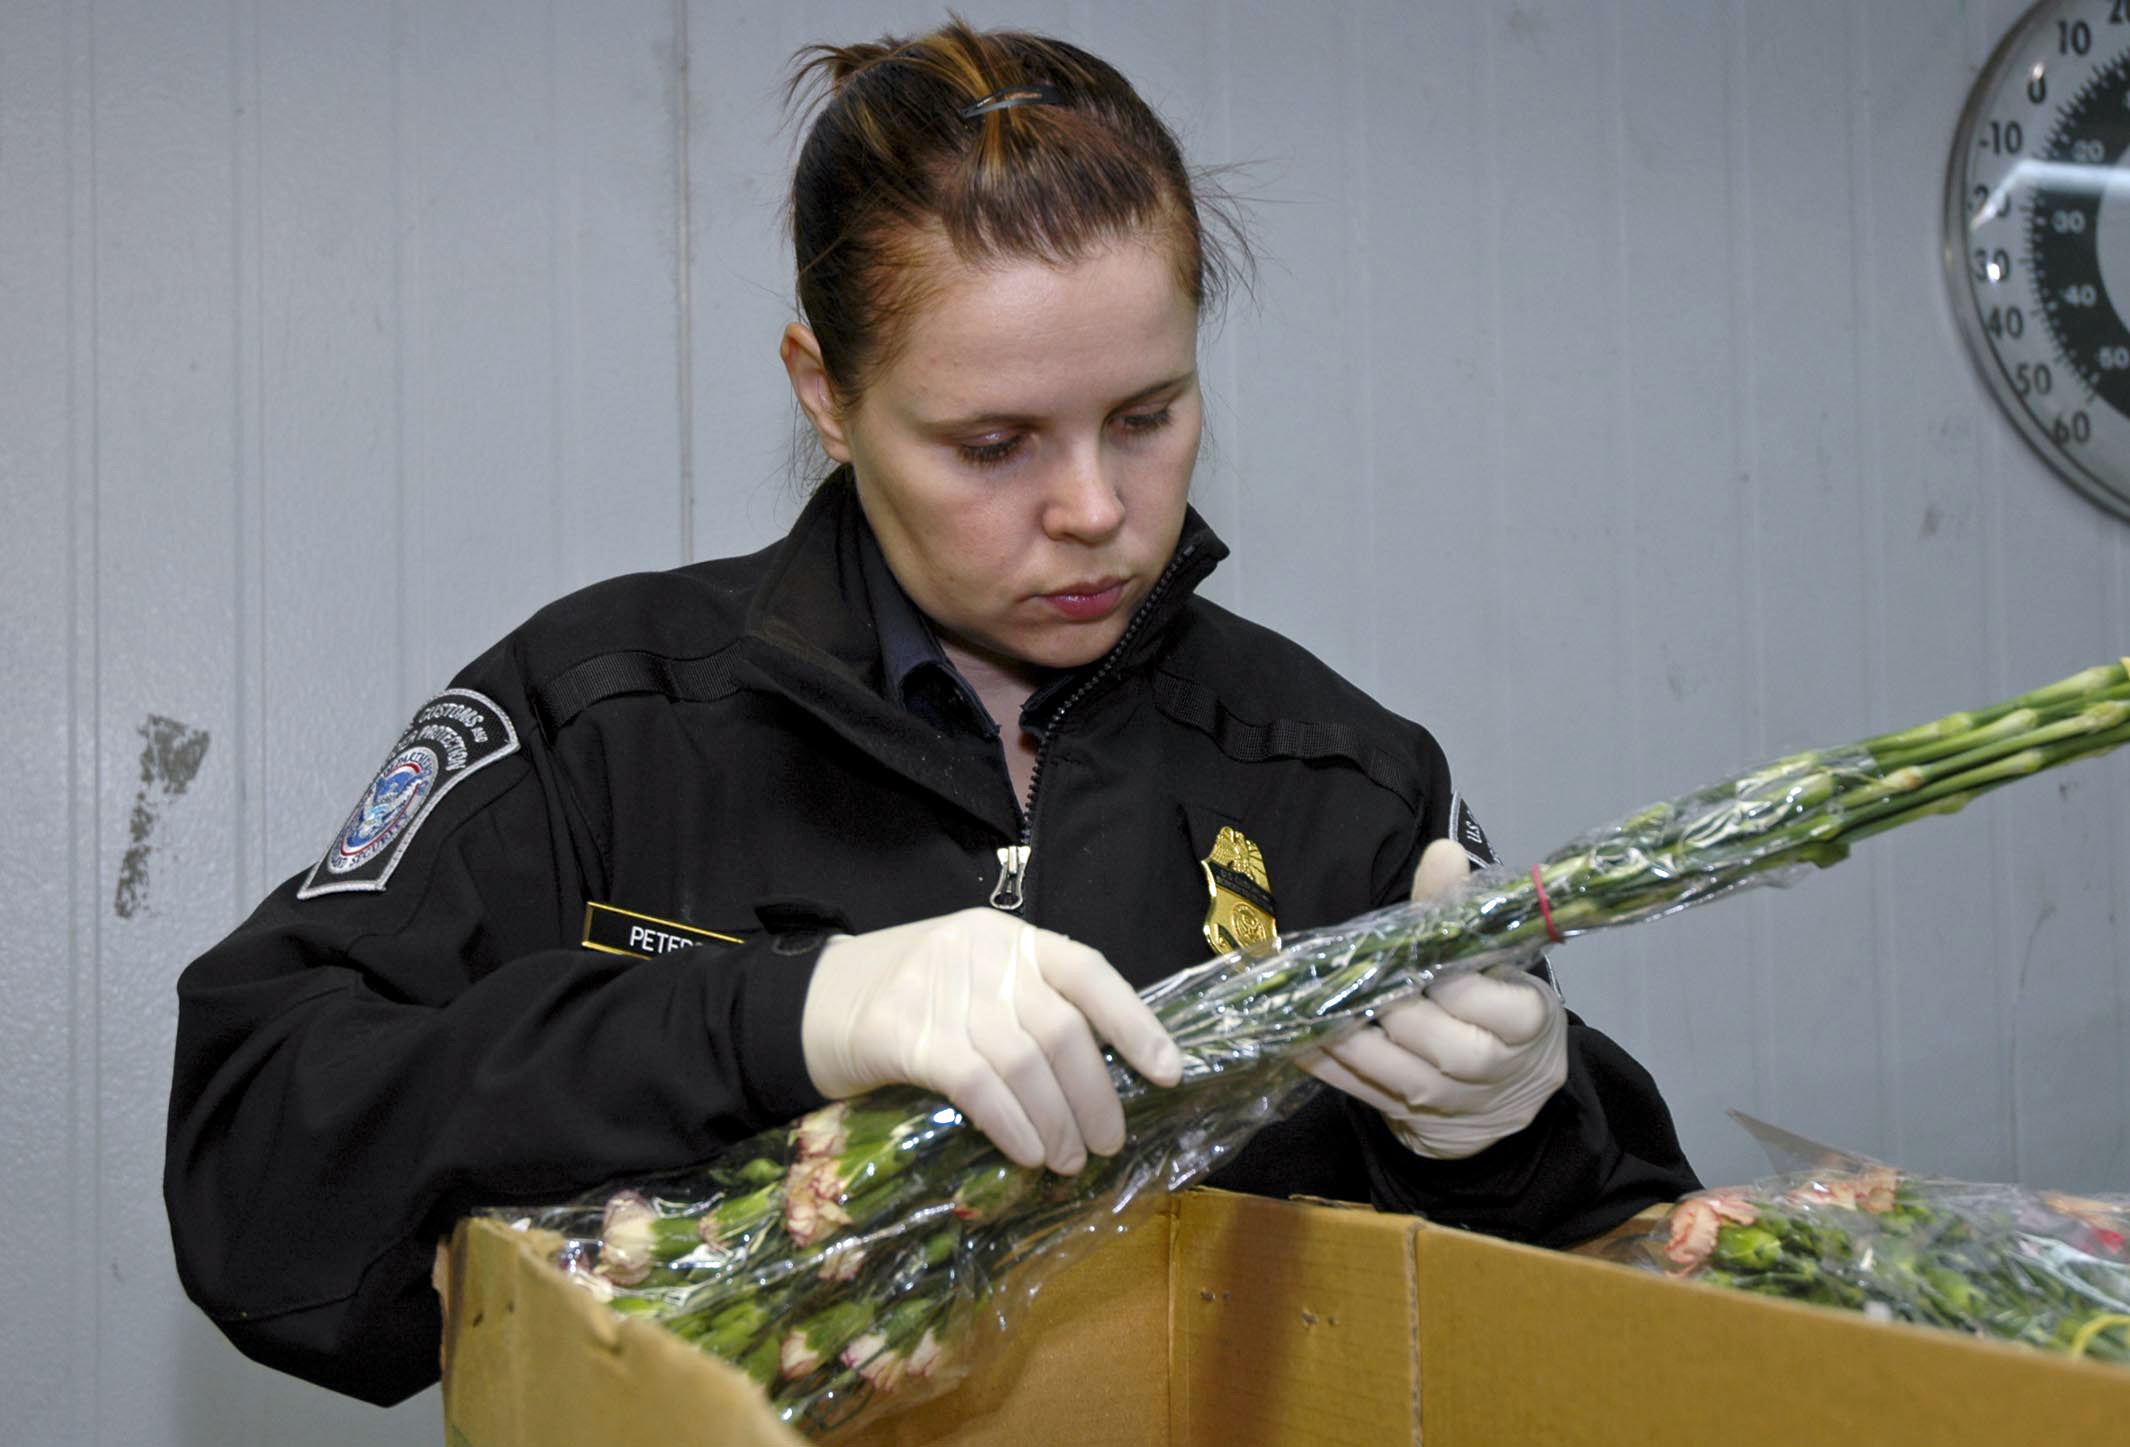 CBP agriculture specialist examines flower stems.